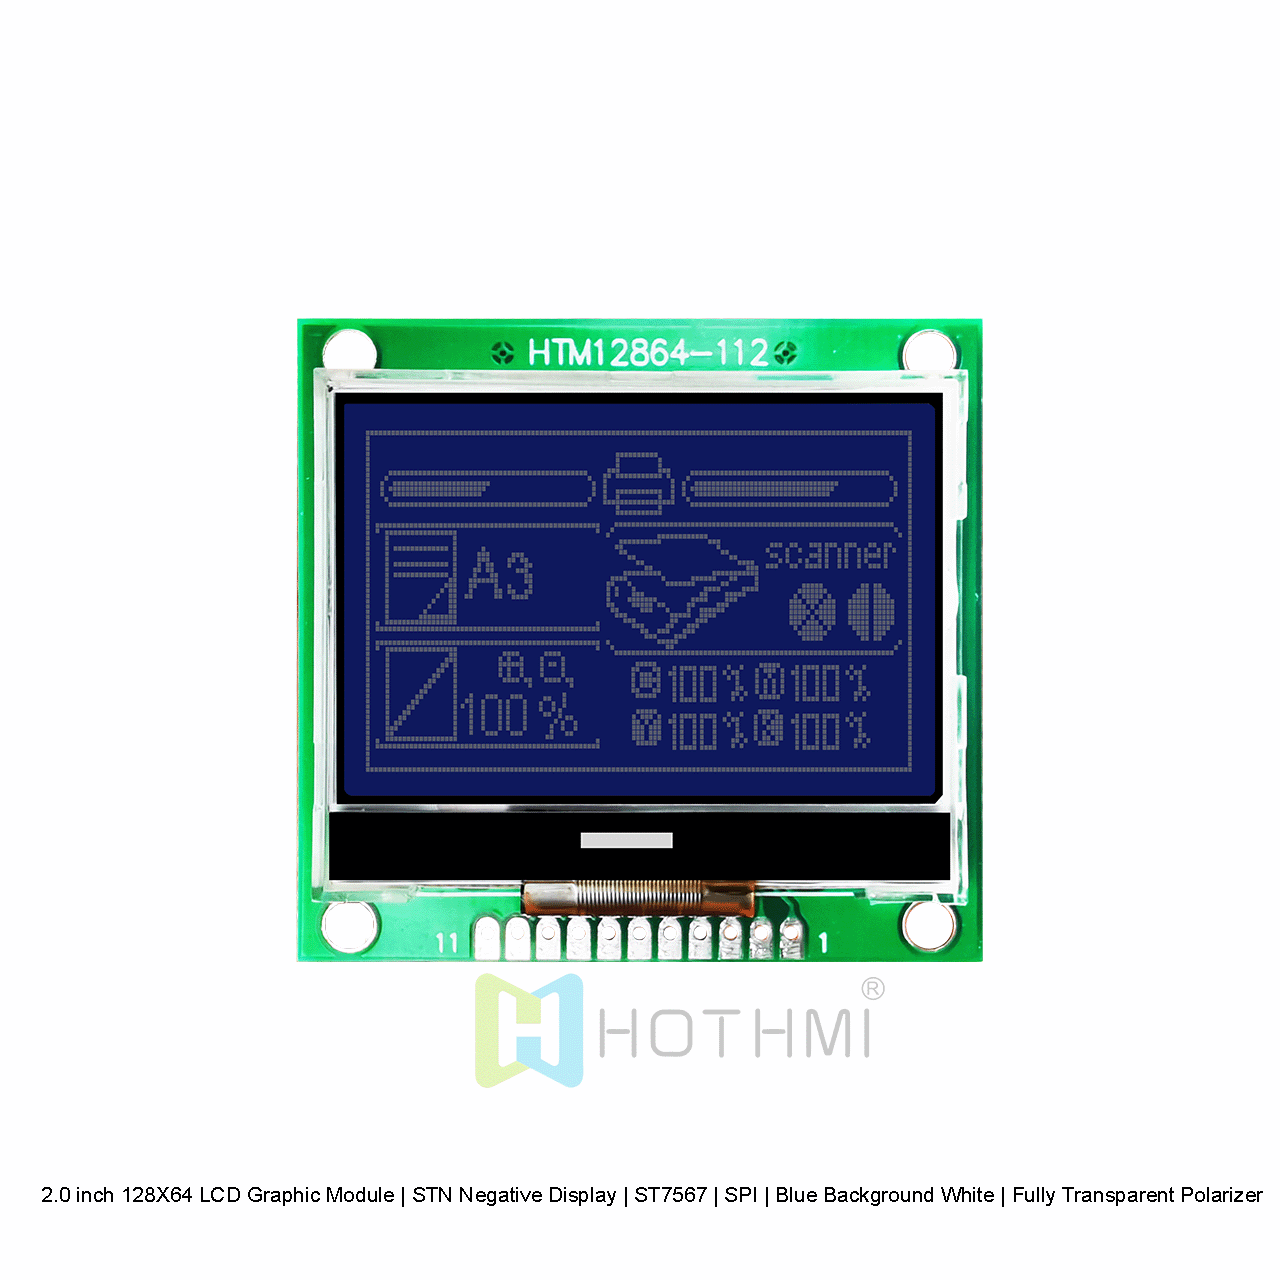 2.0 inch 128X64 LCD Graphic Module | STN Negative Display | ST7567 | SPI | Blue Background White | Fully Transparent Polarizer arduino